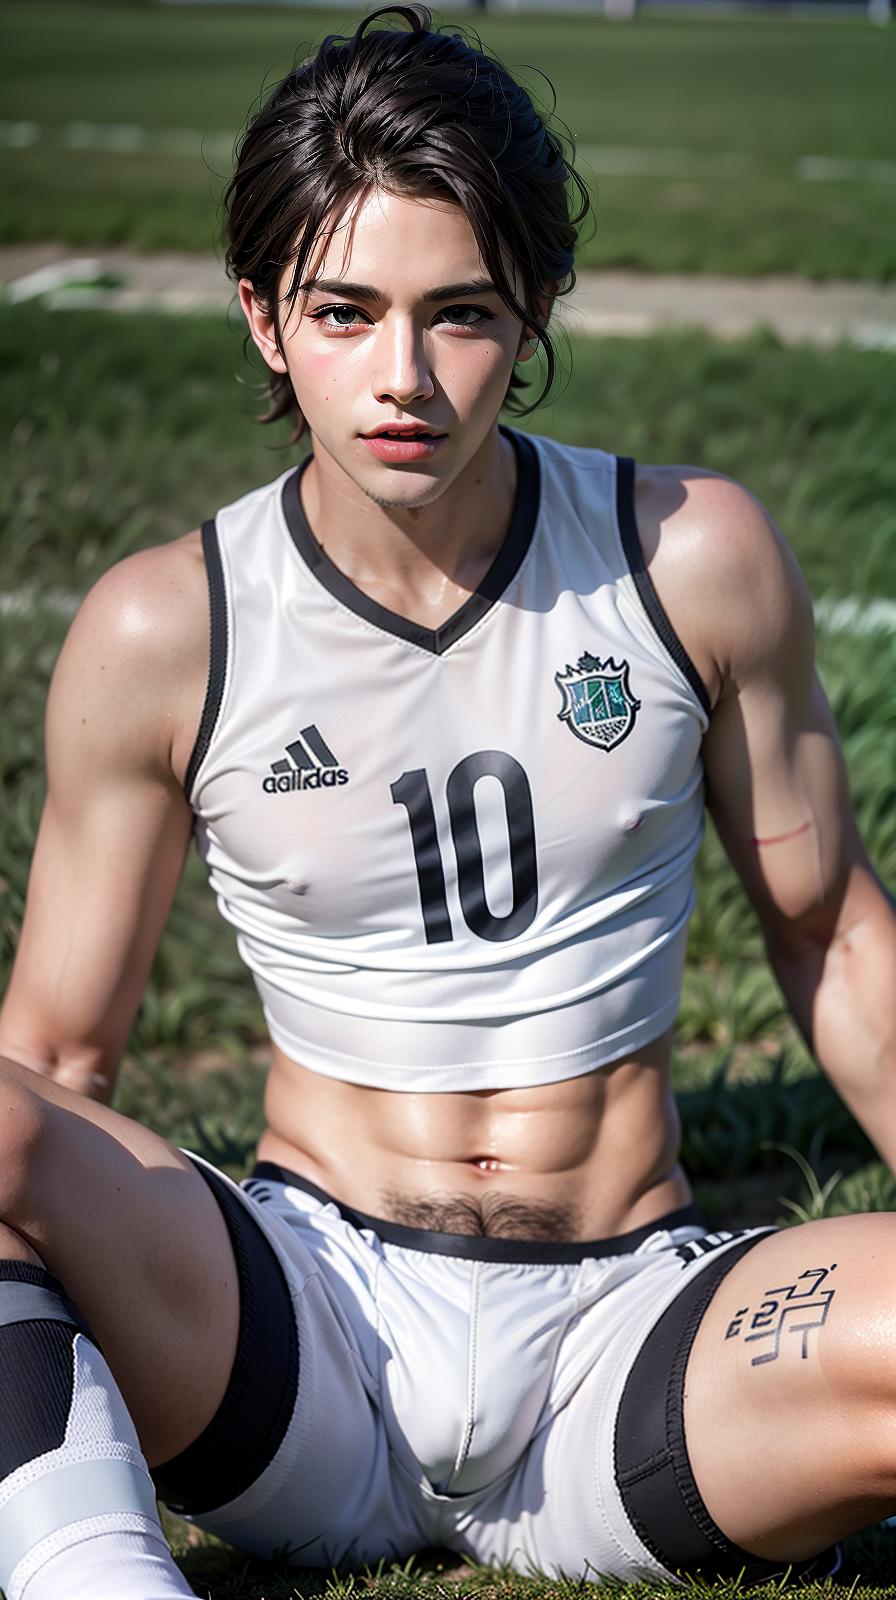  ultra high res, (photorealistic:1.4), raw photo, (realistic face), realistic eyes, (realistic skin), <lora:XXMix9_v20LoRa:0.8>, (handsome:1.4), (male:2.1), (young soccer players:1.3), (pompadour:1.3), (white briefs:1.3), (sleeveless:1.2), spike shoes, (soccer shin guards:1.3), young, sitting posture, (spread legs:1.1), real skin, (sexy posing:1.3), hot guy, (muscular:1.3), (naked:1.1), (bulge:1.1), trained calves, thigh, realistic, lifelike, high quality, photos taken with a single-lens reflex camera, (looking at the camera:1.2)